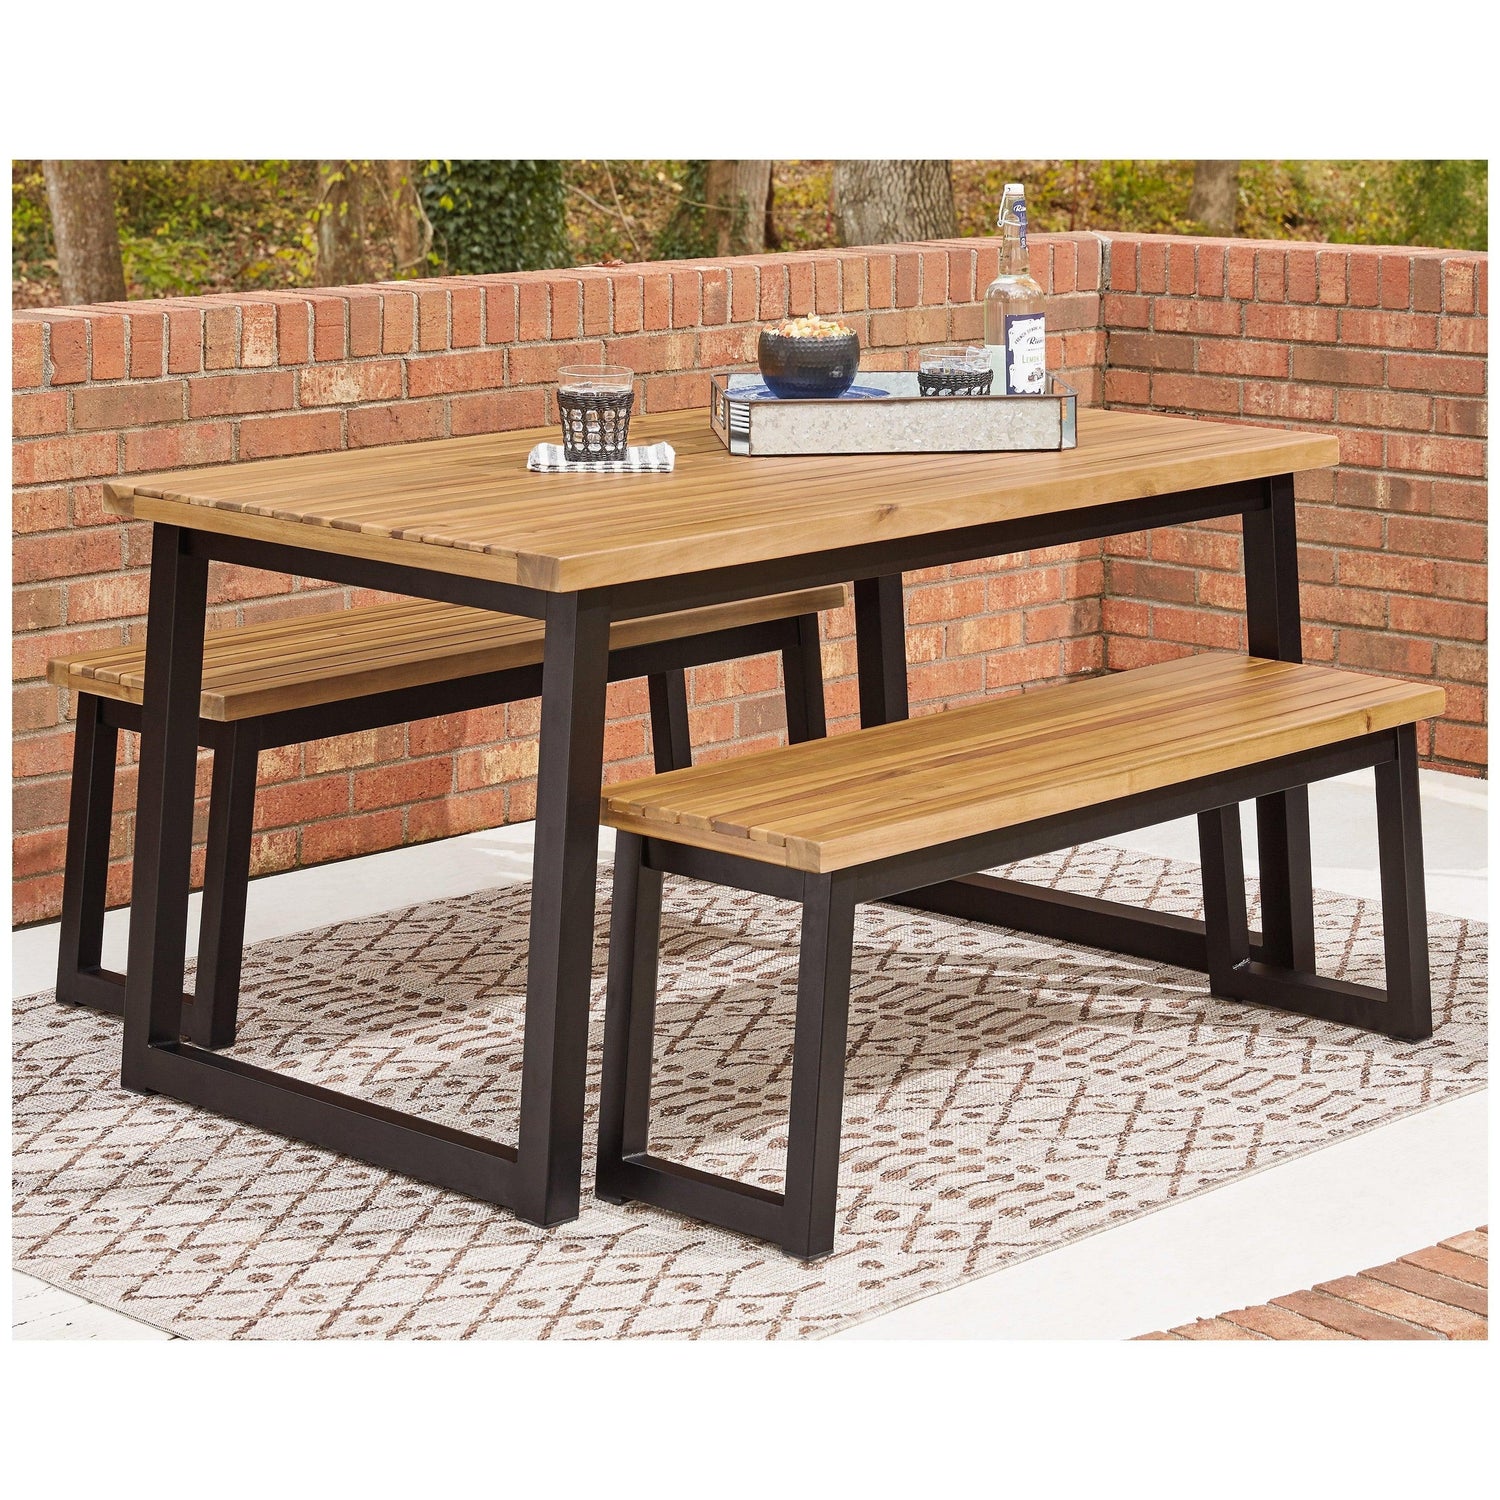 Town Wood Outdoor Dining Table Set (Set of 3) Ash-P220-115